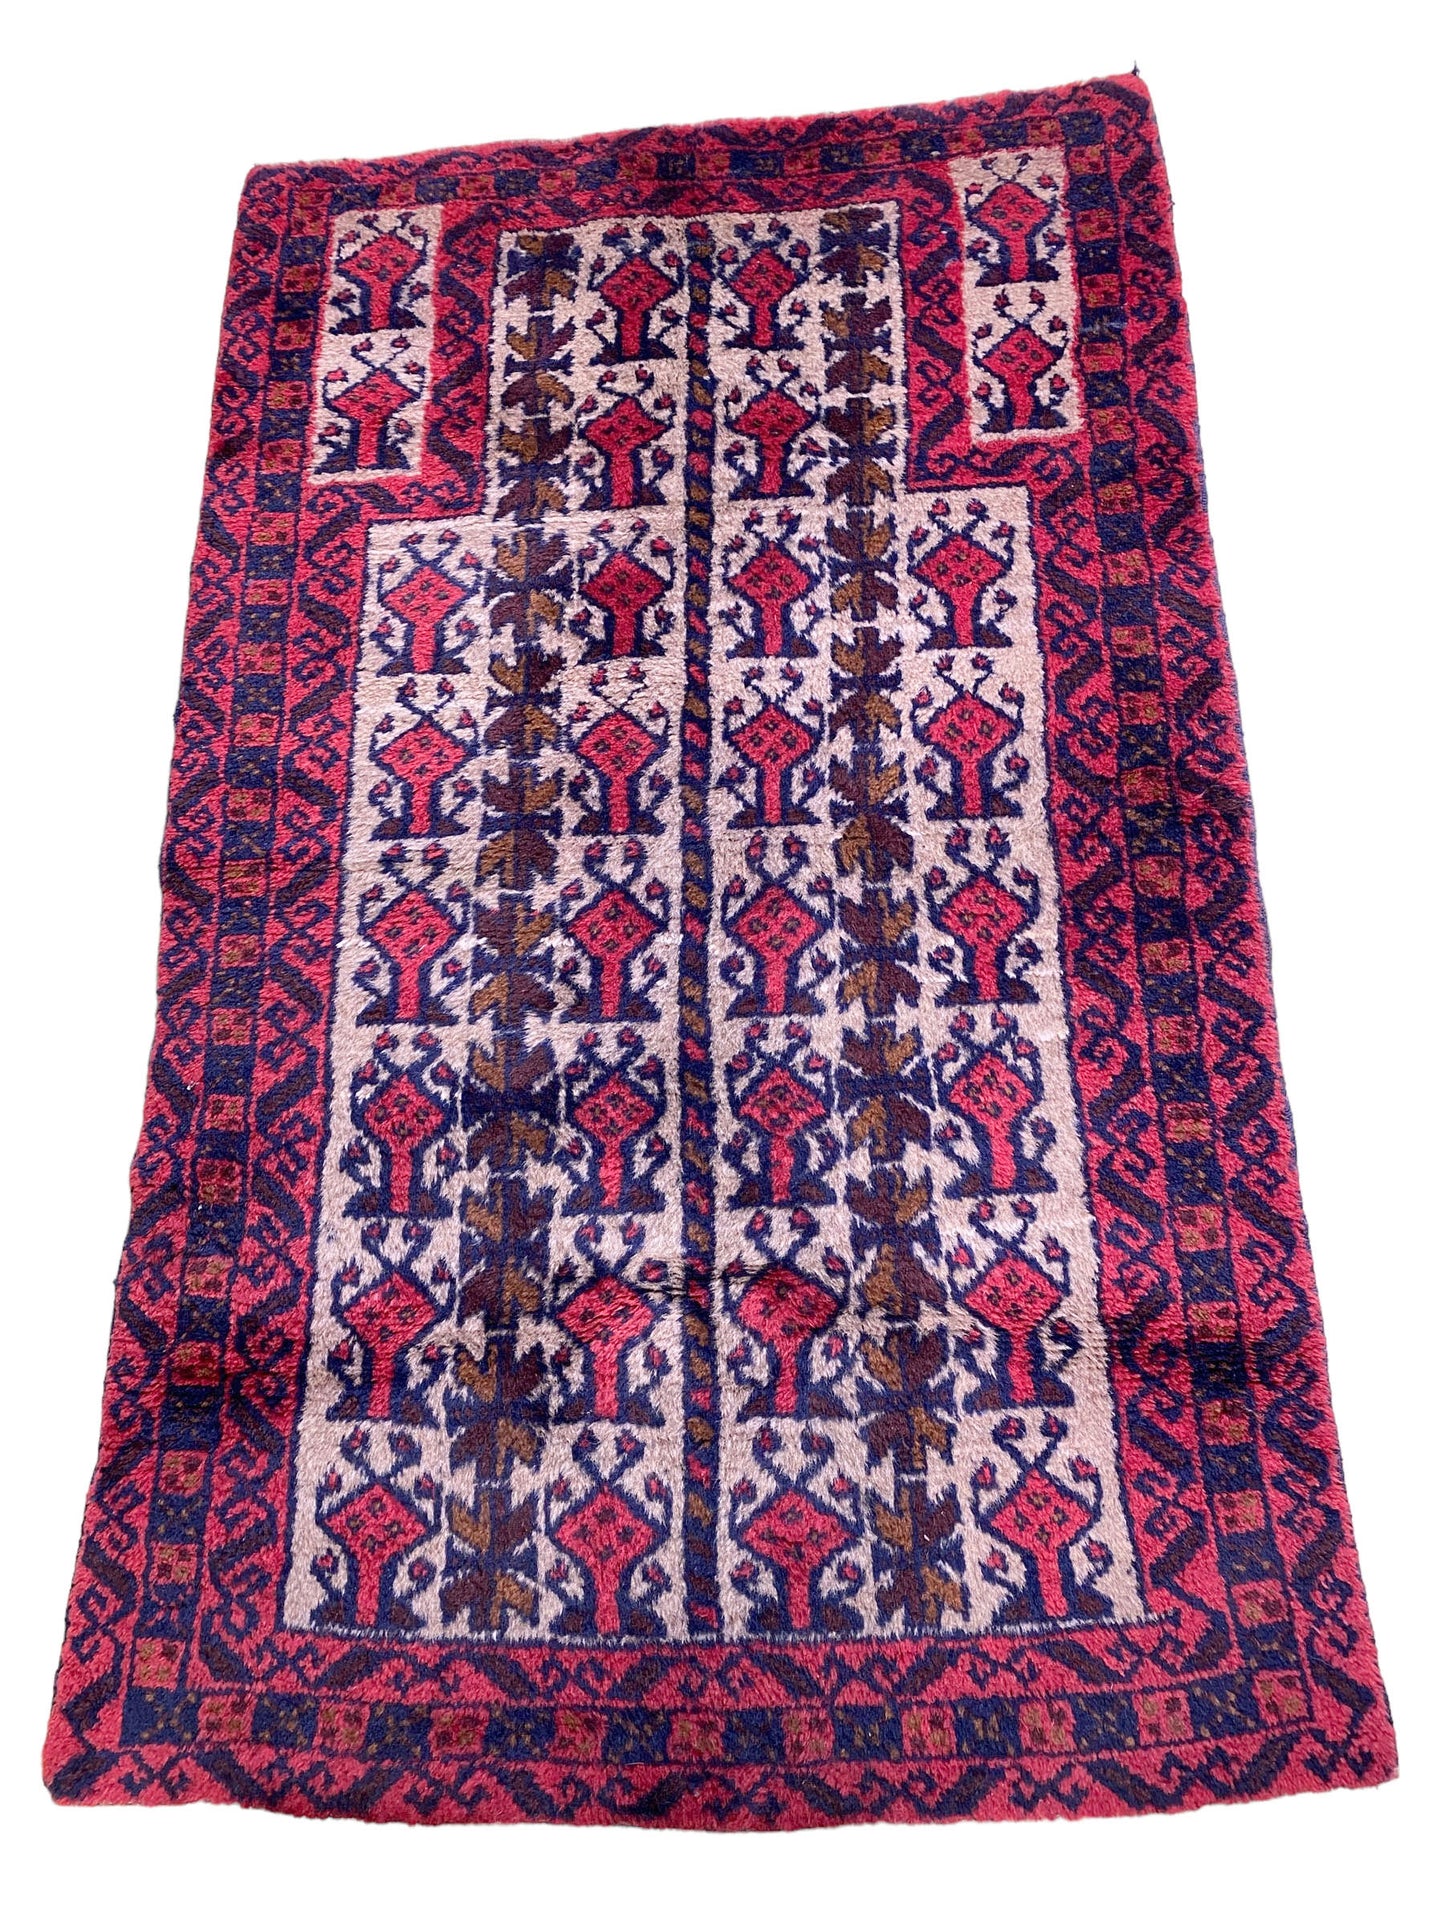 #7022 1950's Hand-knotted  Afghan Baluch Prayer Rug, 2'75" by 4'5"